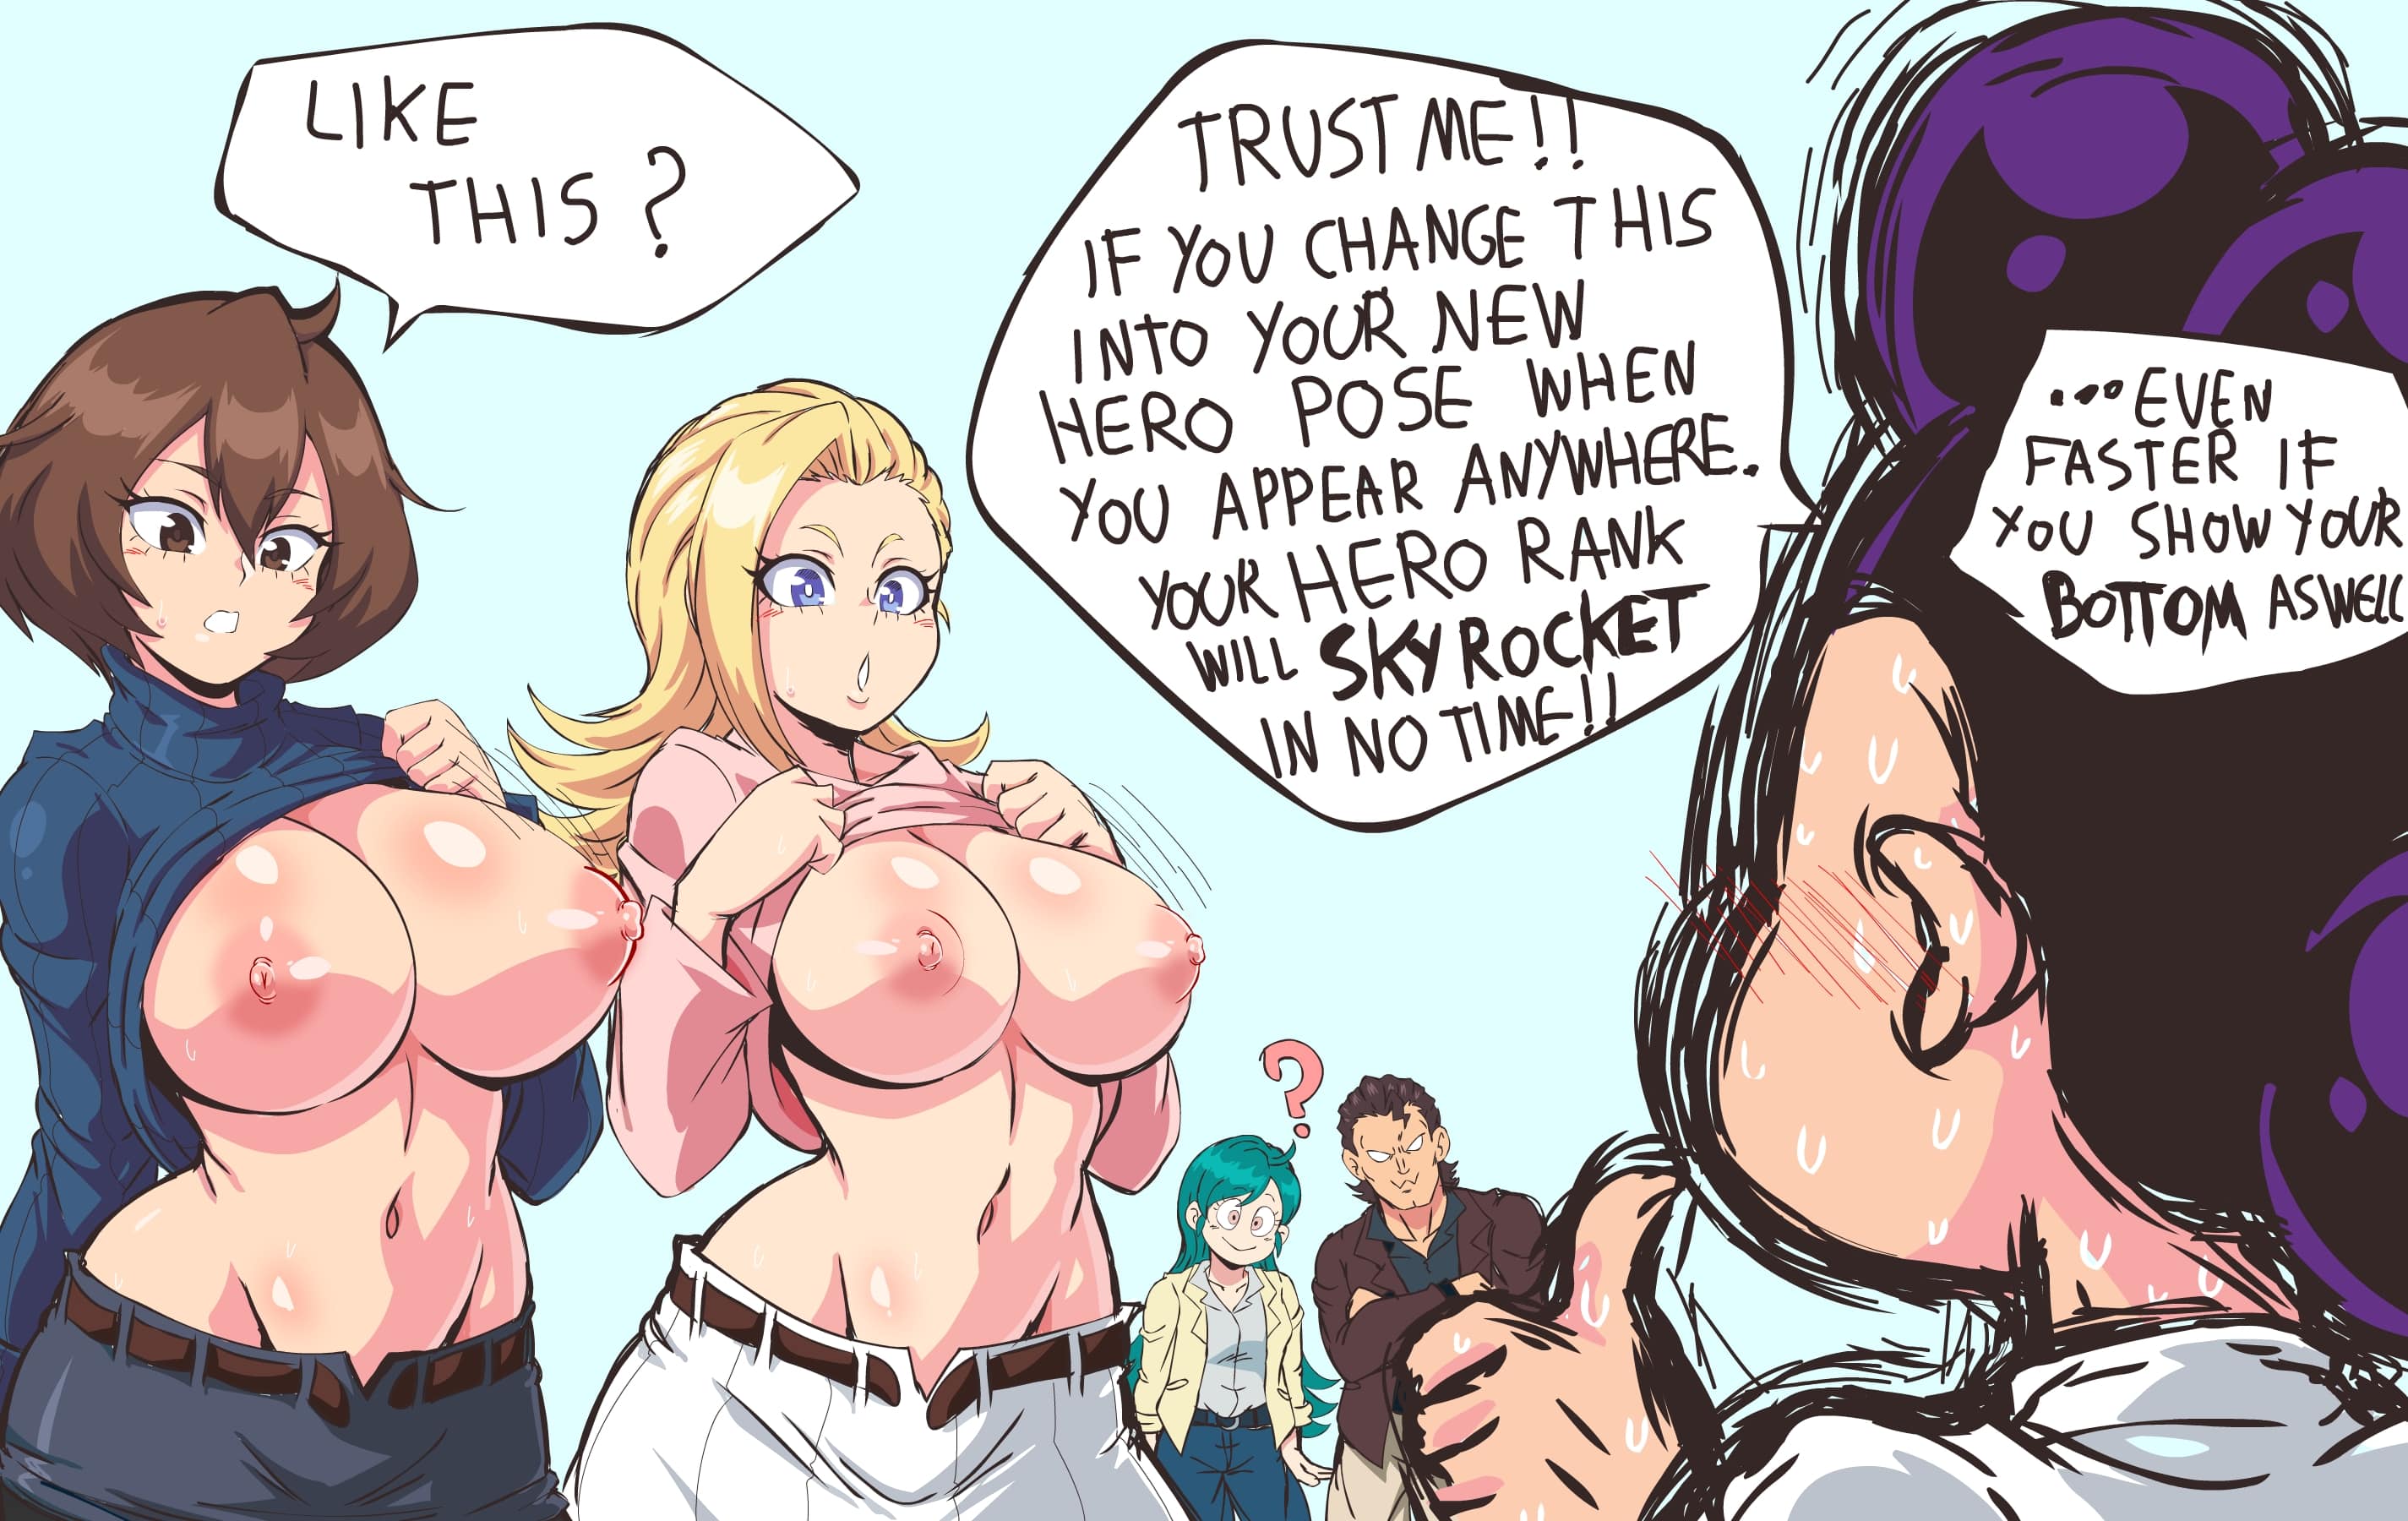 Mineta Share Secret to Become Viral With Mandalay and Pixie Bob by Lewdamone